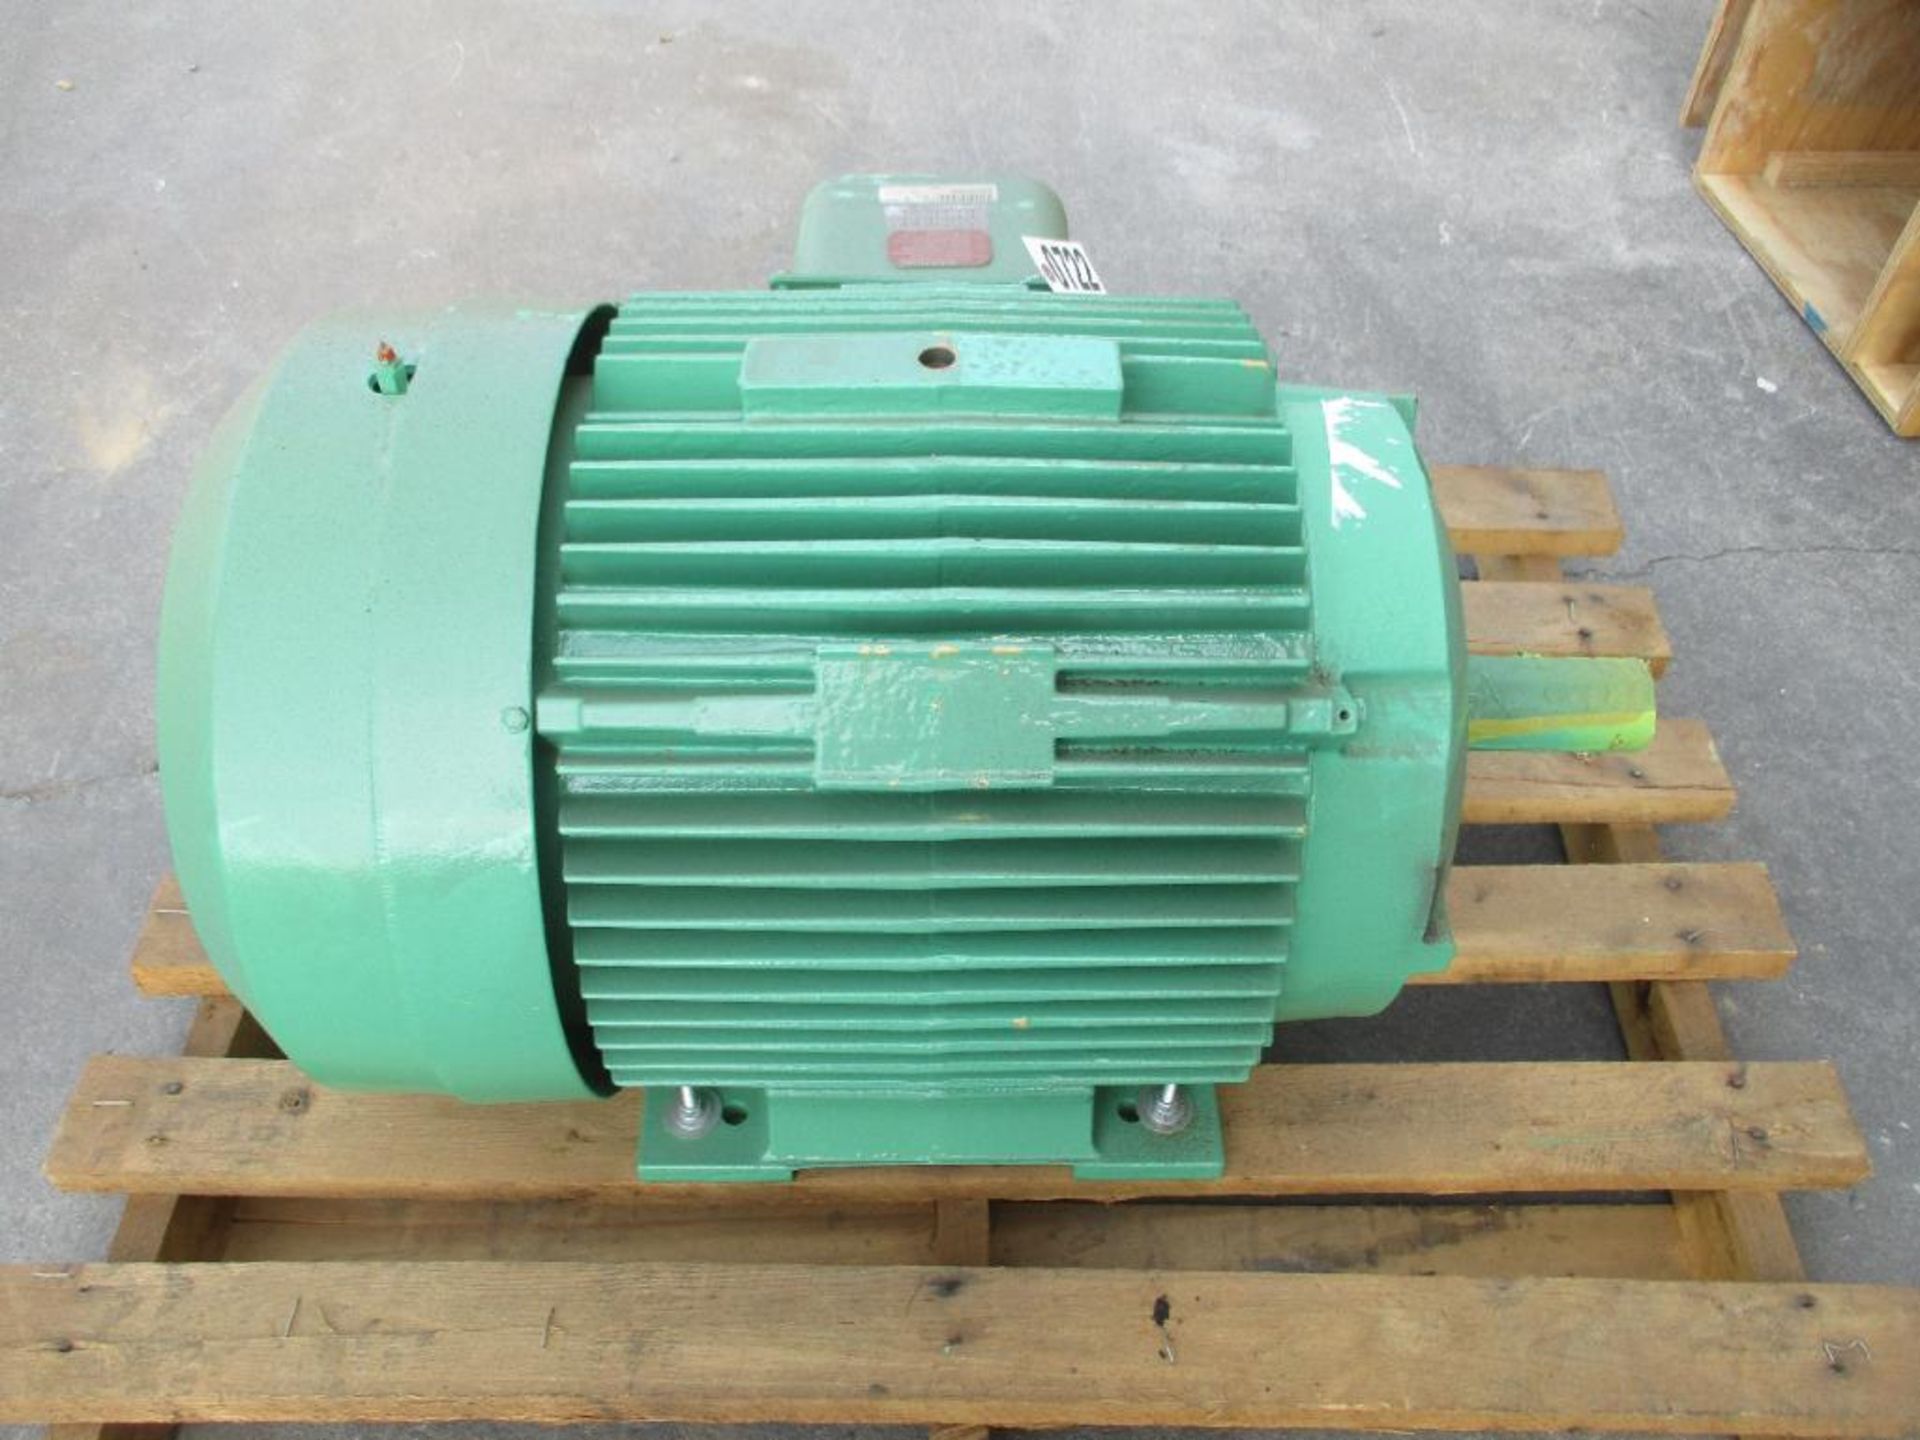 BALDOR 3 PHASE 60HP 1800RPM 364T FRAME A/C MOTOR P/N EM4314T 885# LBS (THIS LOT IS FOB KNOXVILLE TN) - Image 3 of 5